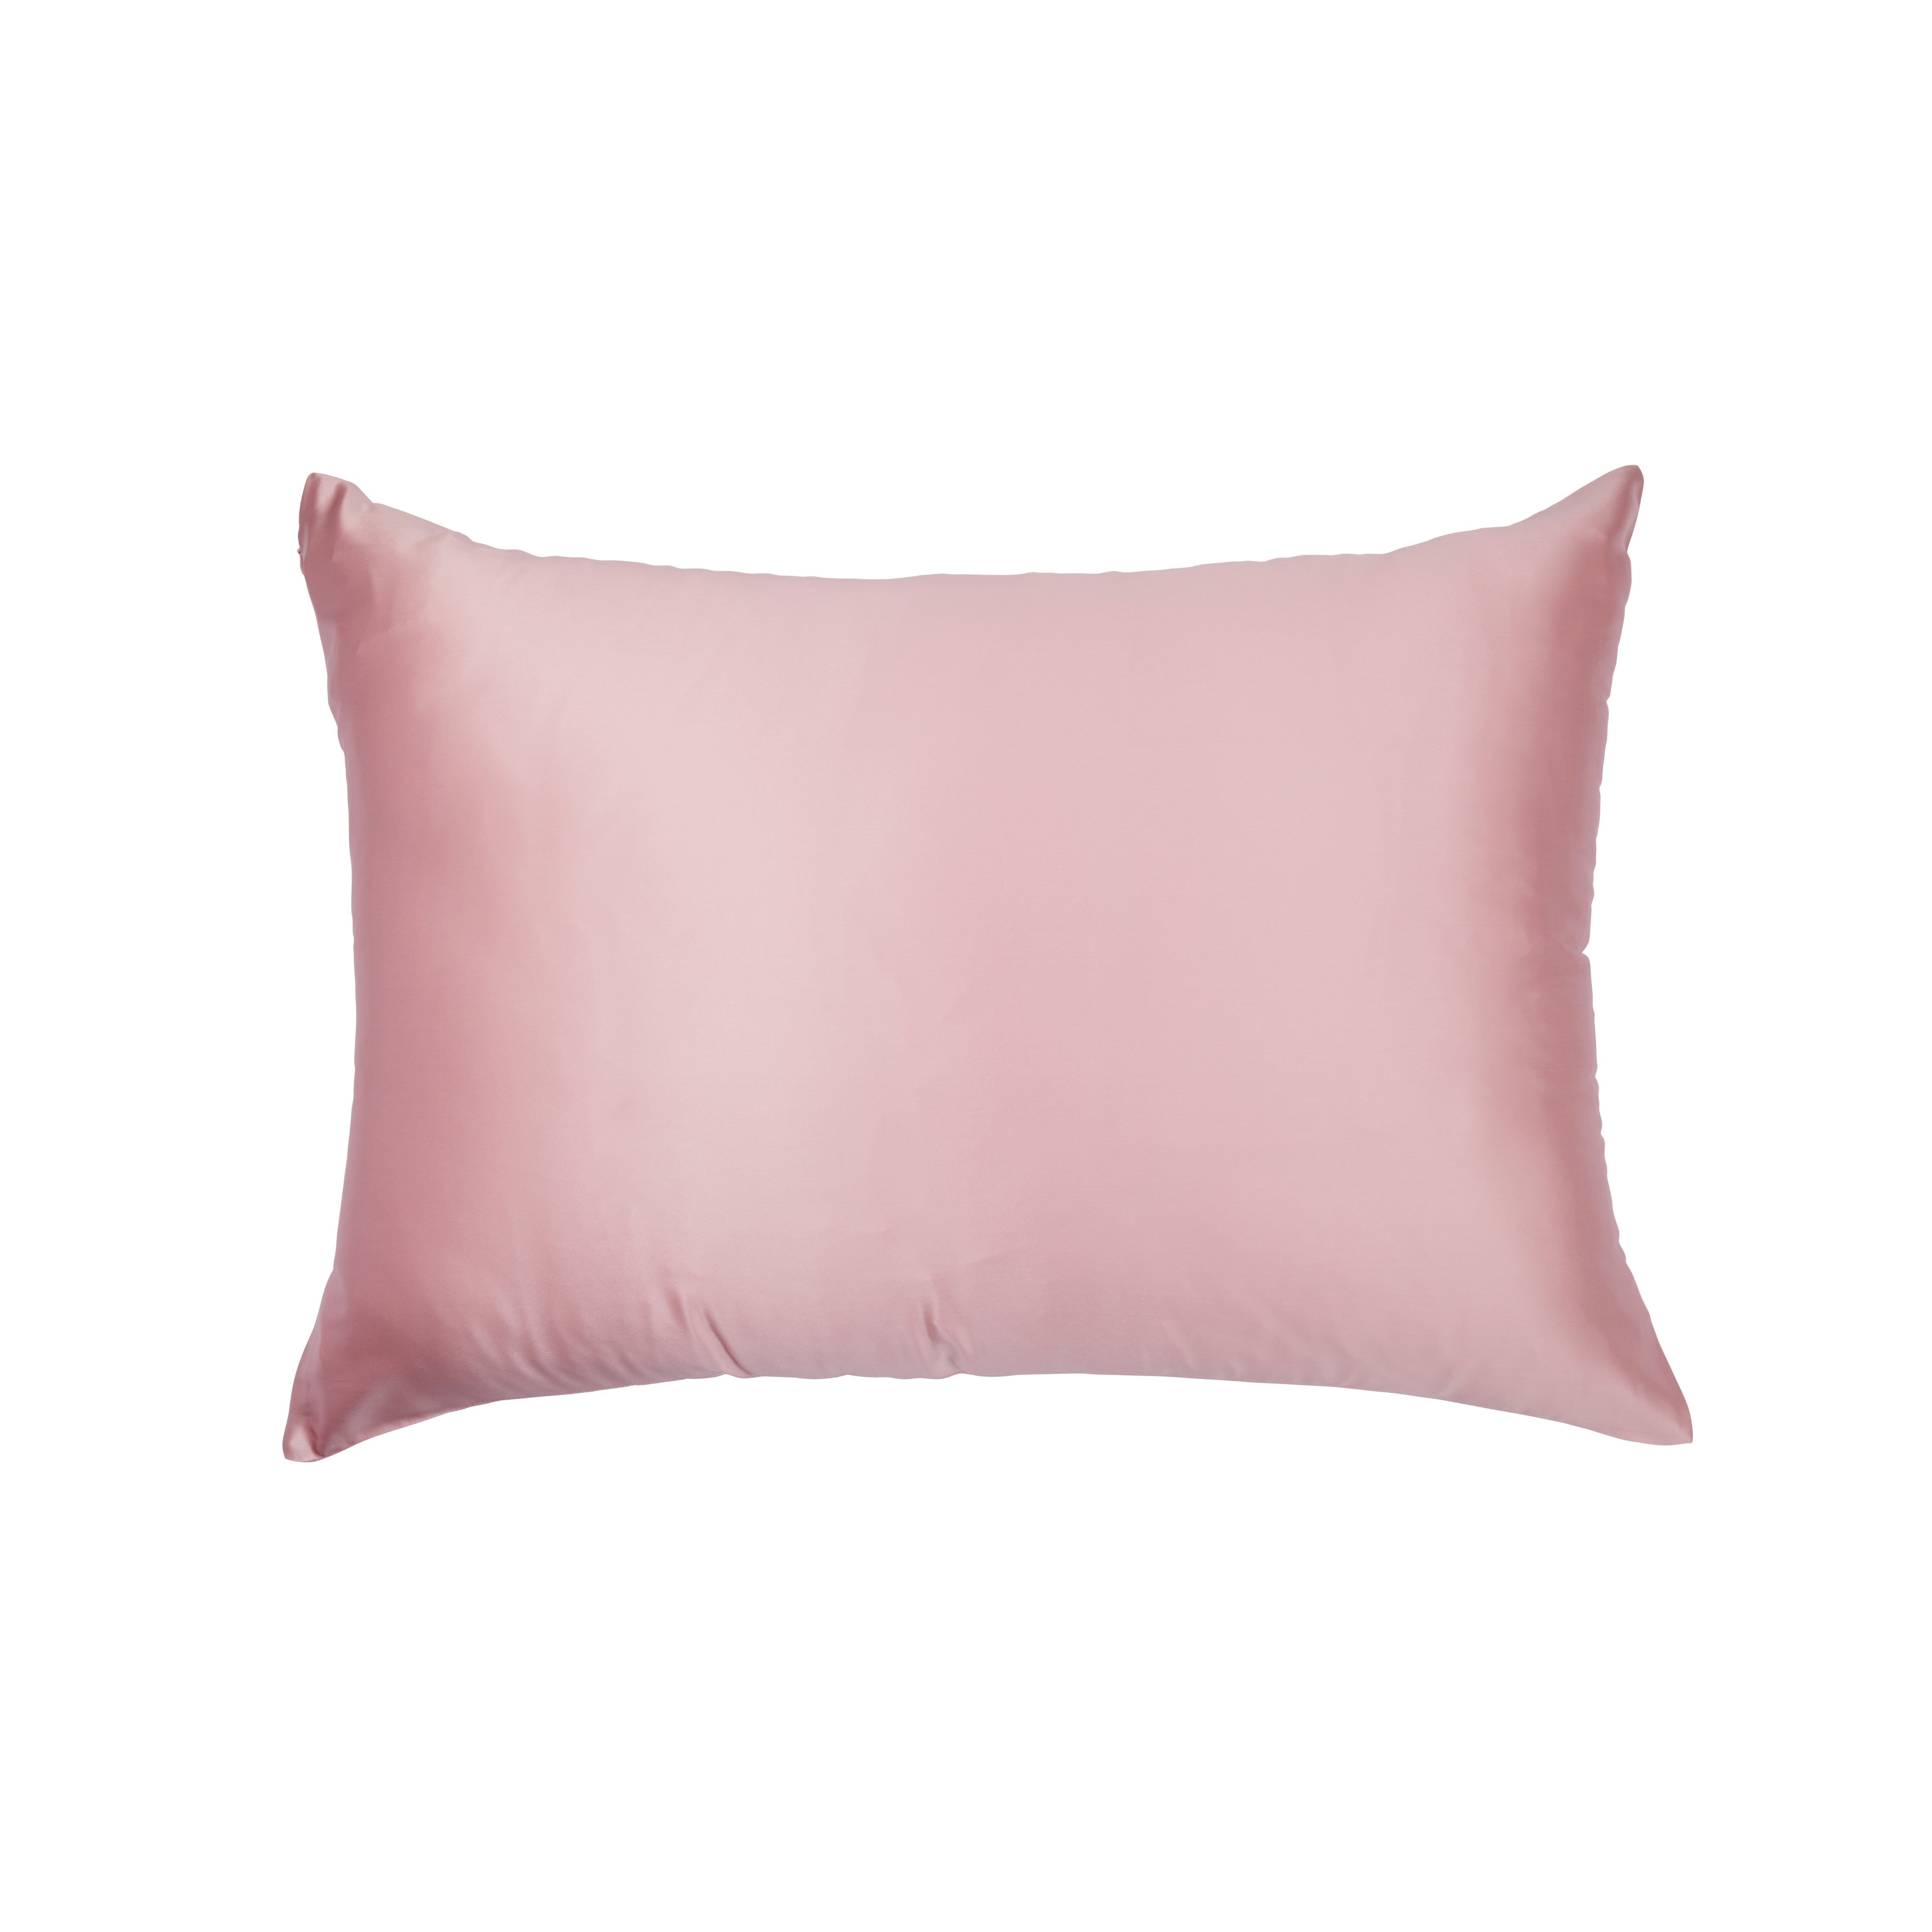 The Silk Pillowcase Made For Your Skin & Hair - Lunalux